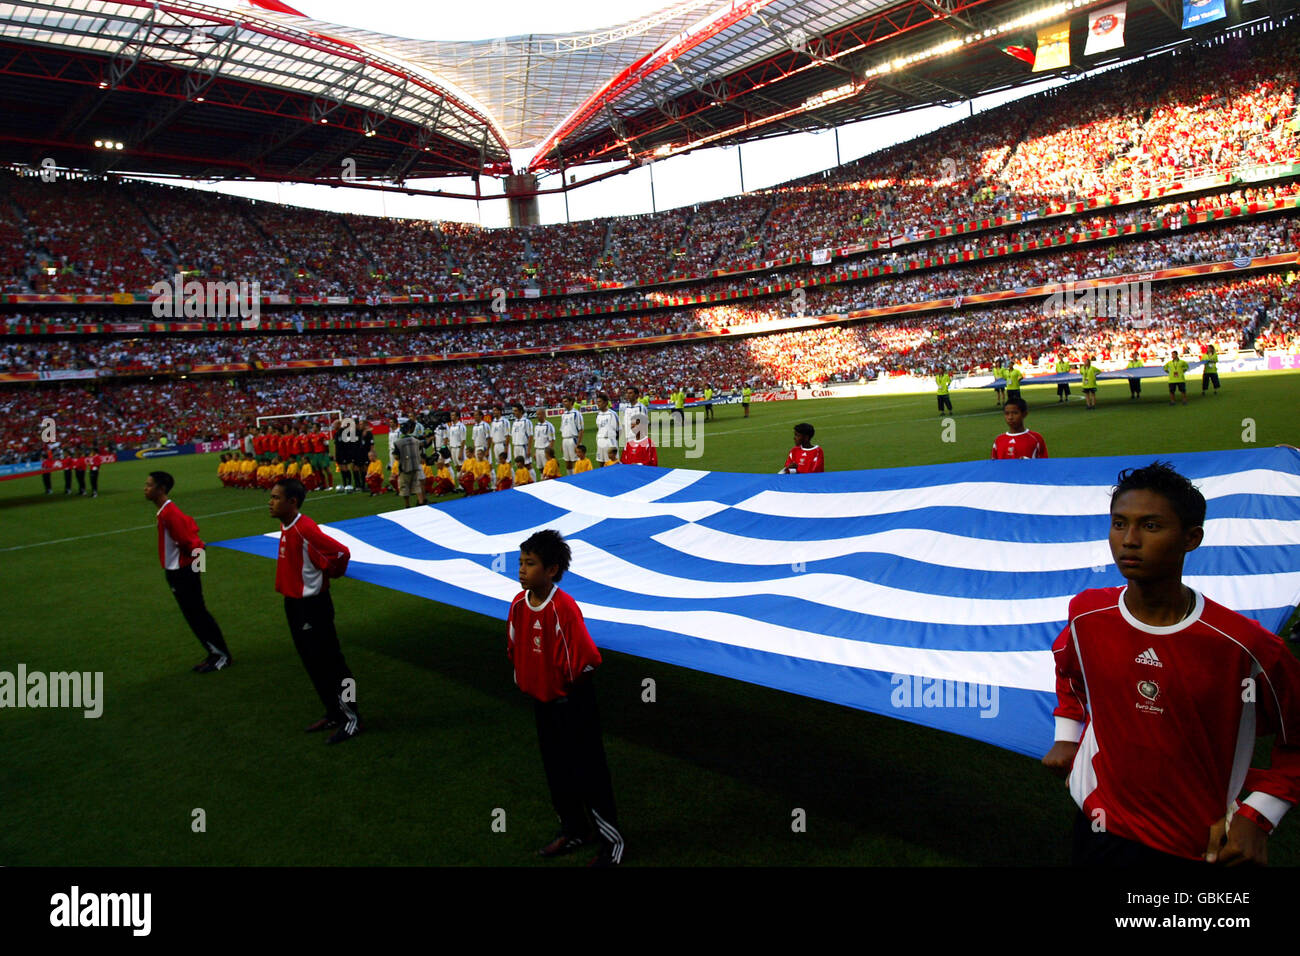 Soccer - UEFA European Championship 2004 - Final - Portugal v Greece. Ballboys hold the Greece flag as both teams line up for the National anthems Stock Photo